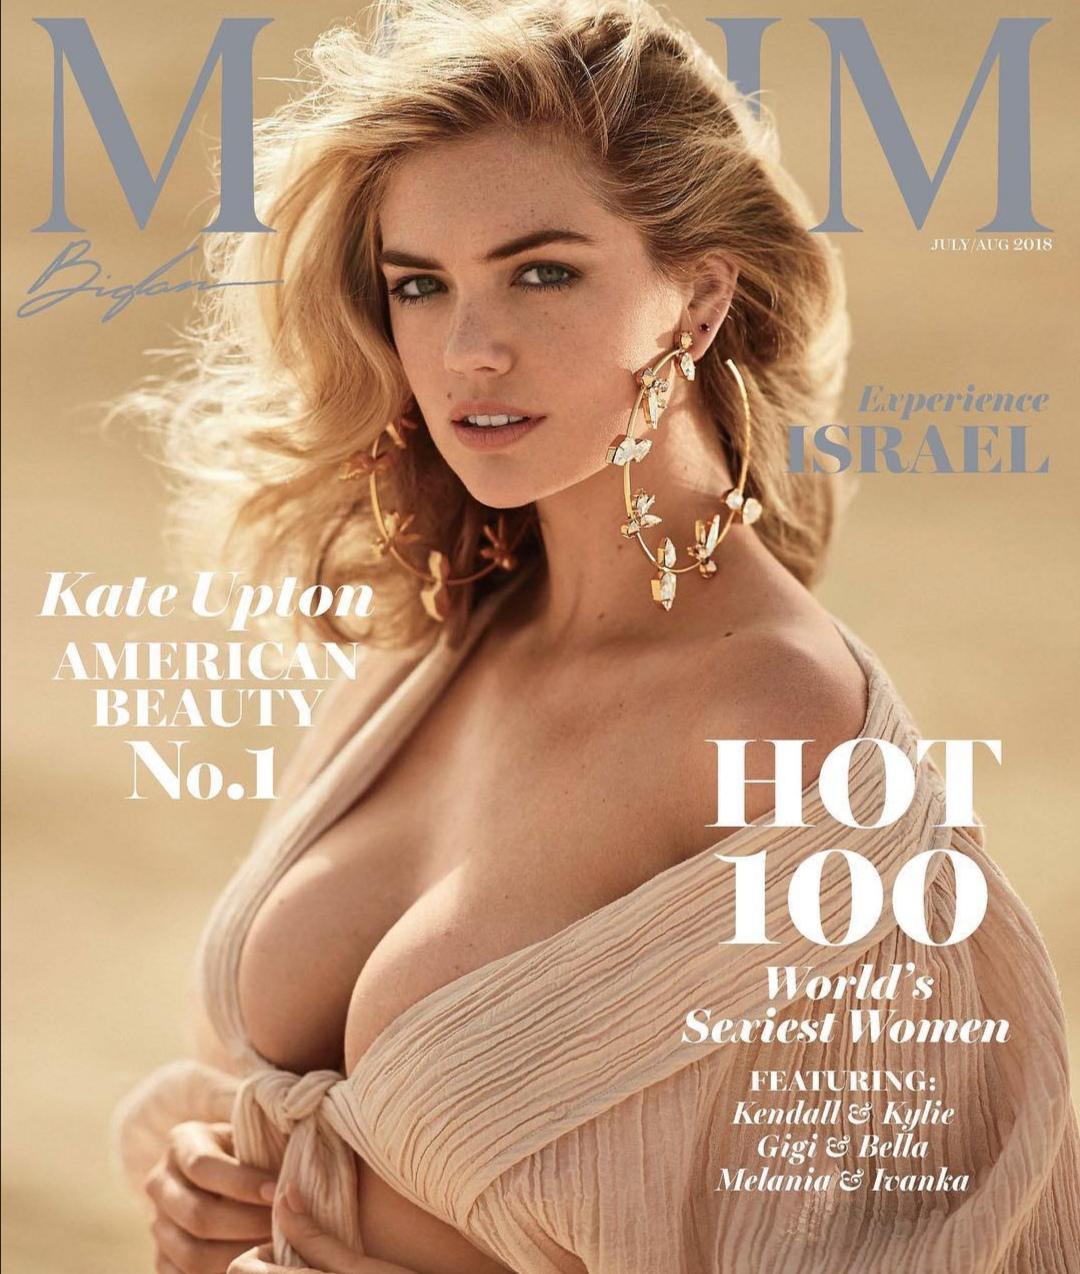 Kate Upton is she still the first American beauty for